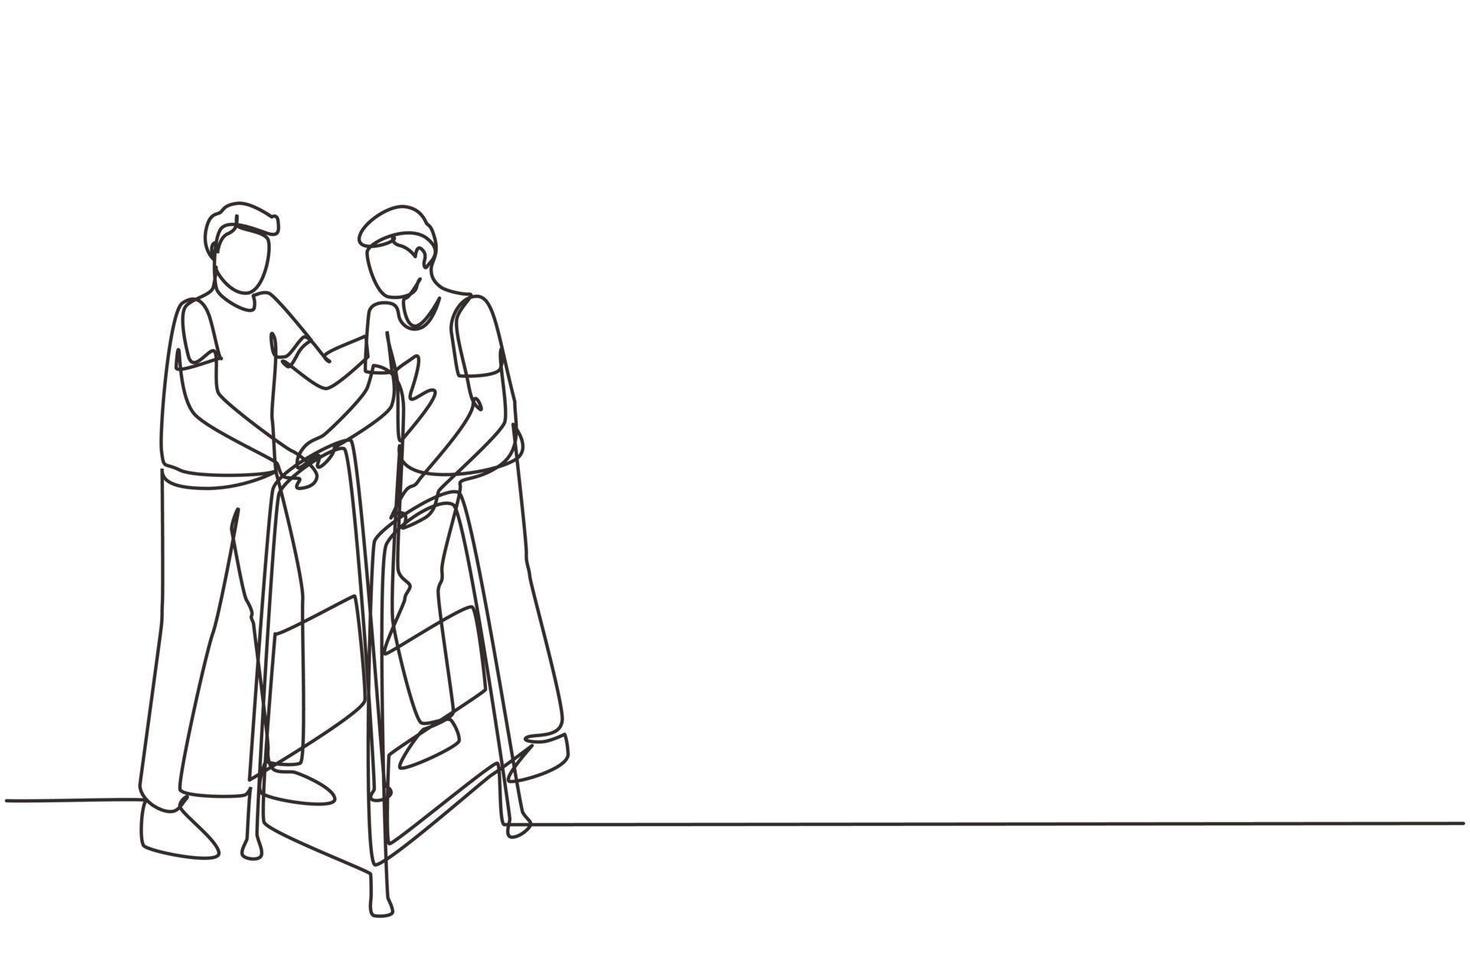 Single continuous line drawing man walking in medical rehabilitation, physical therapy center. Male in recovery doing exercises. Guy therapist helping in rehab healthcare. One line draw design vector